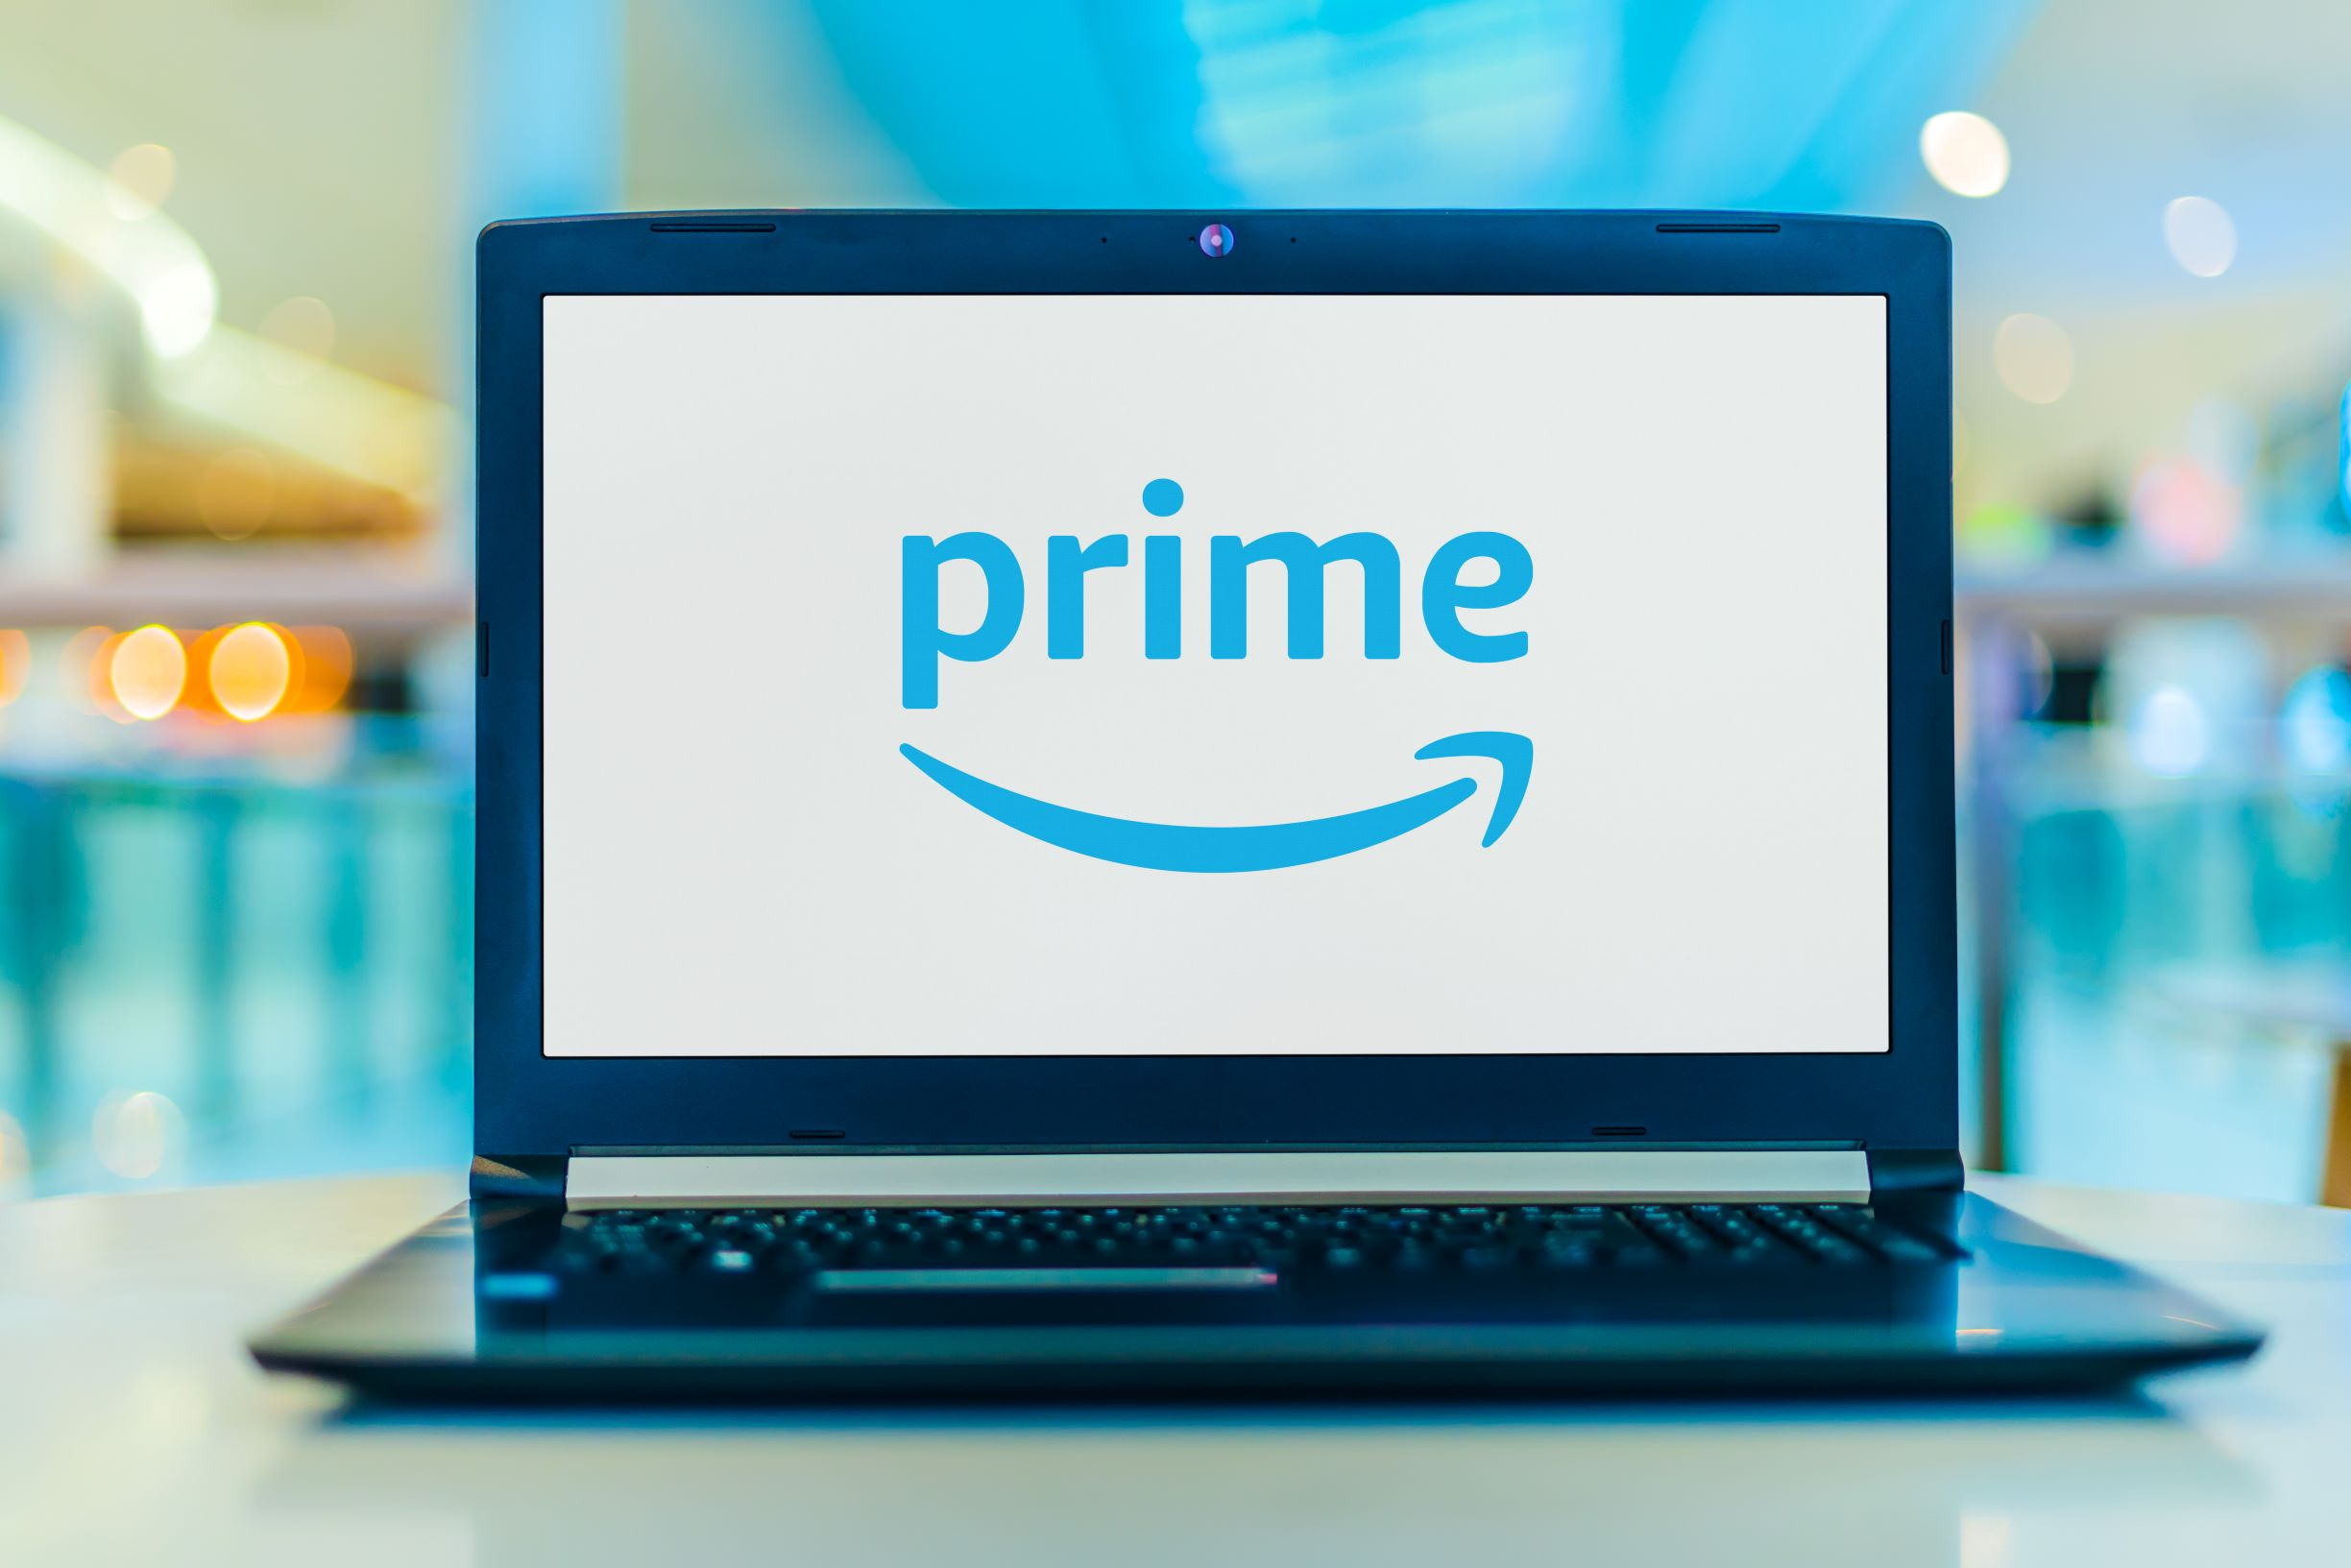  Prime Members gain an additional benefit